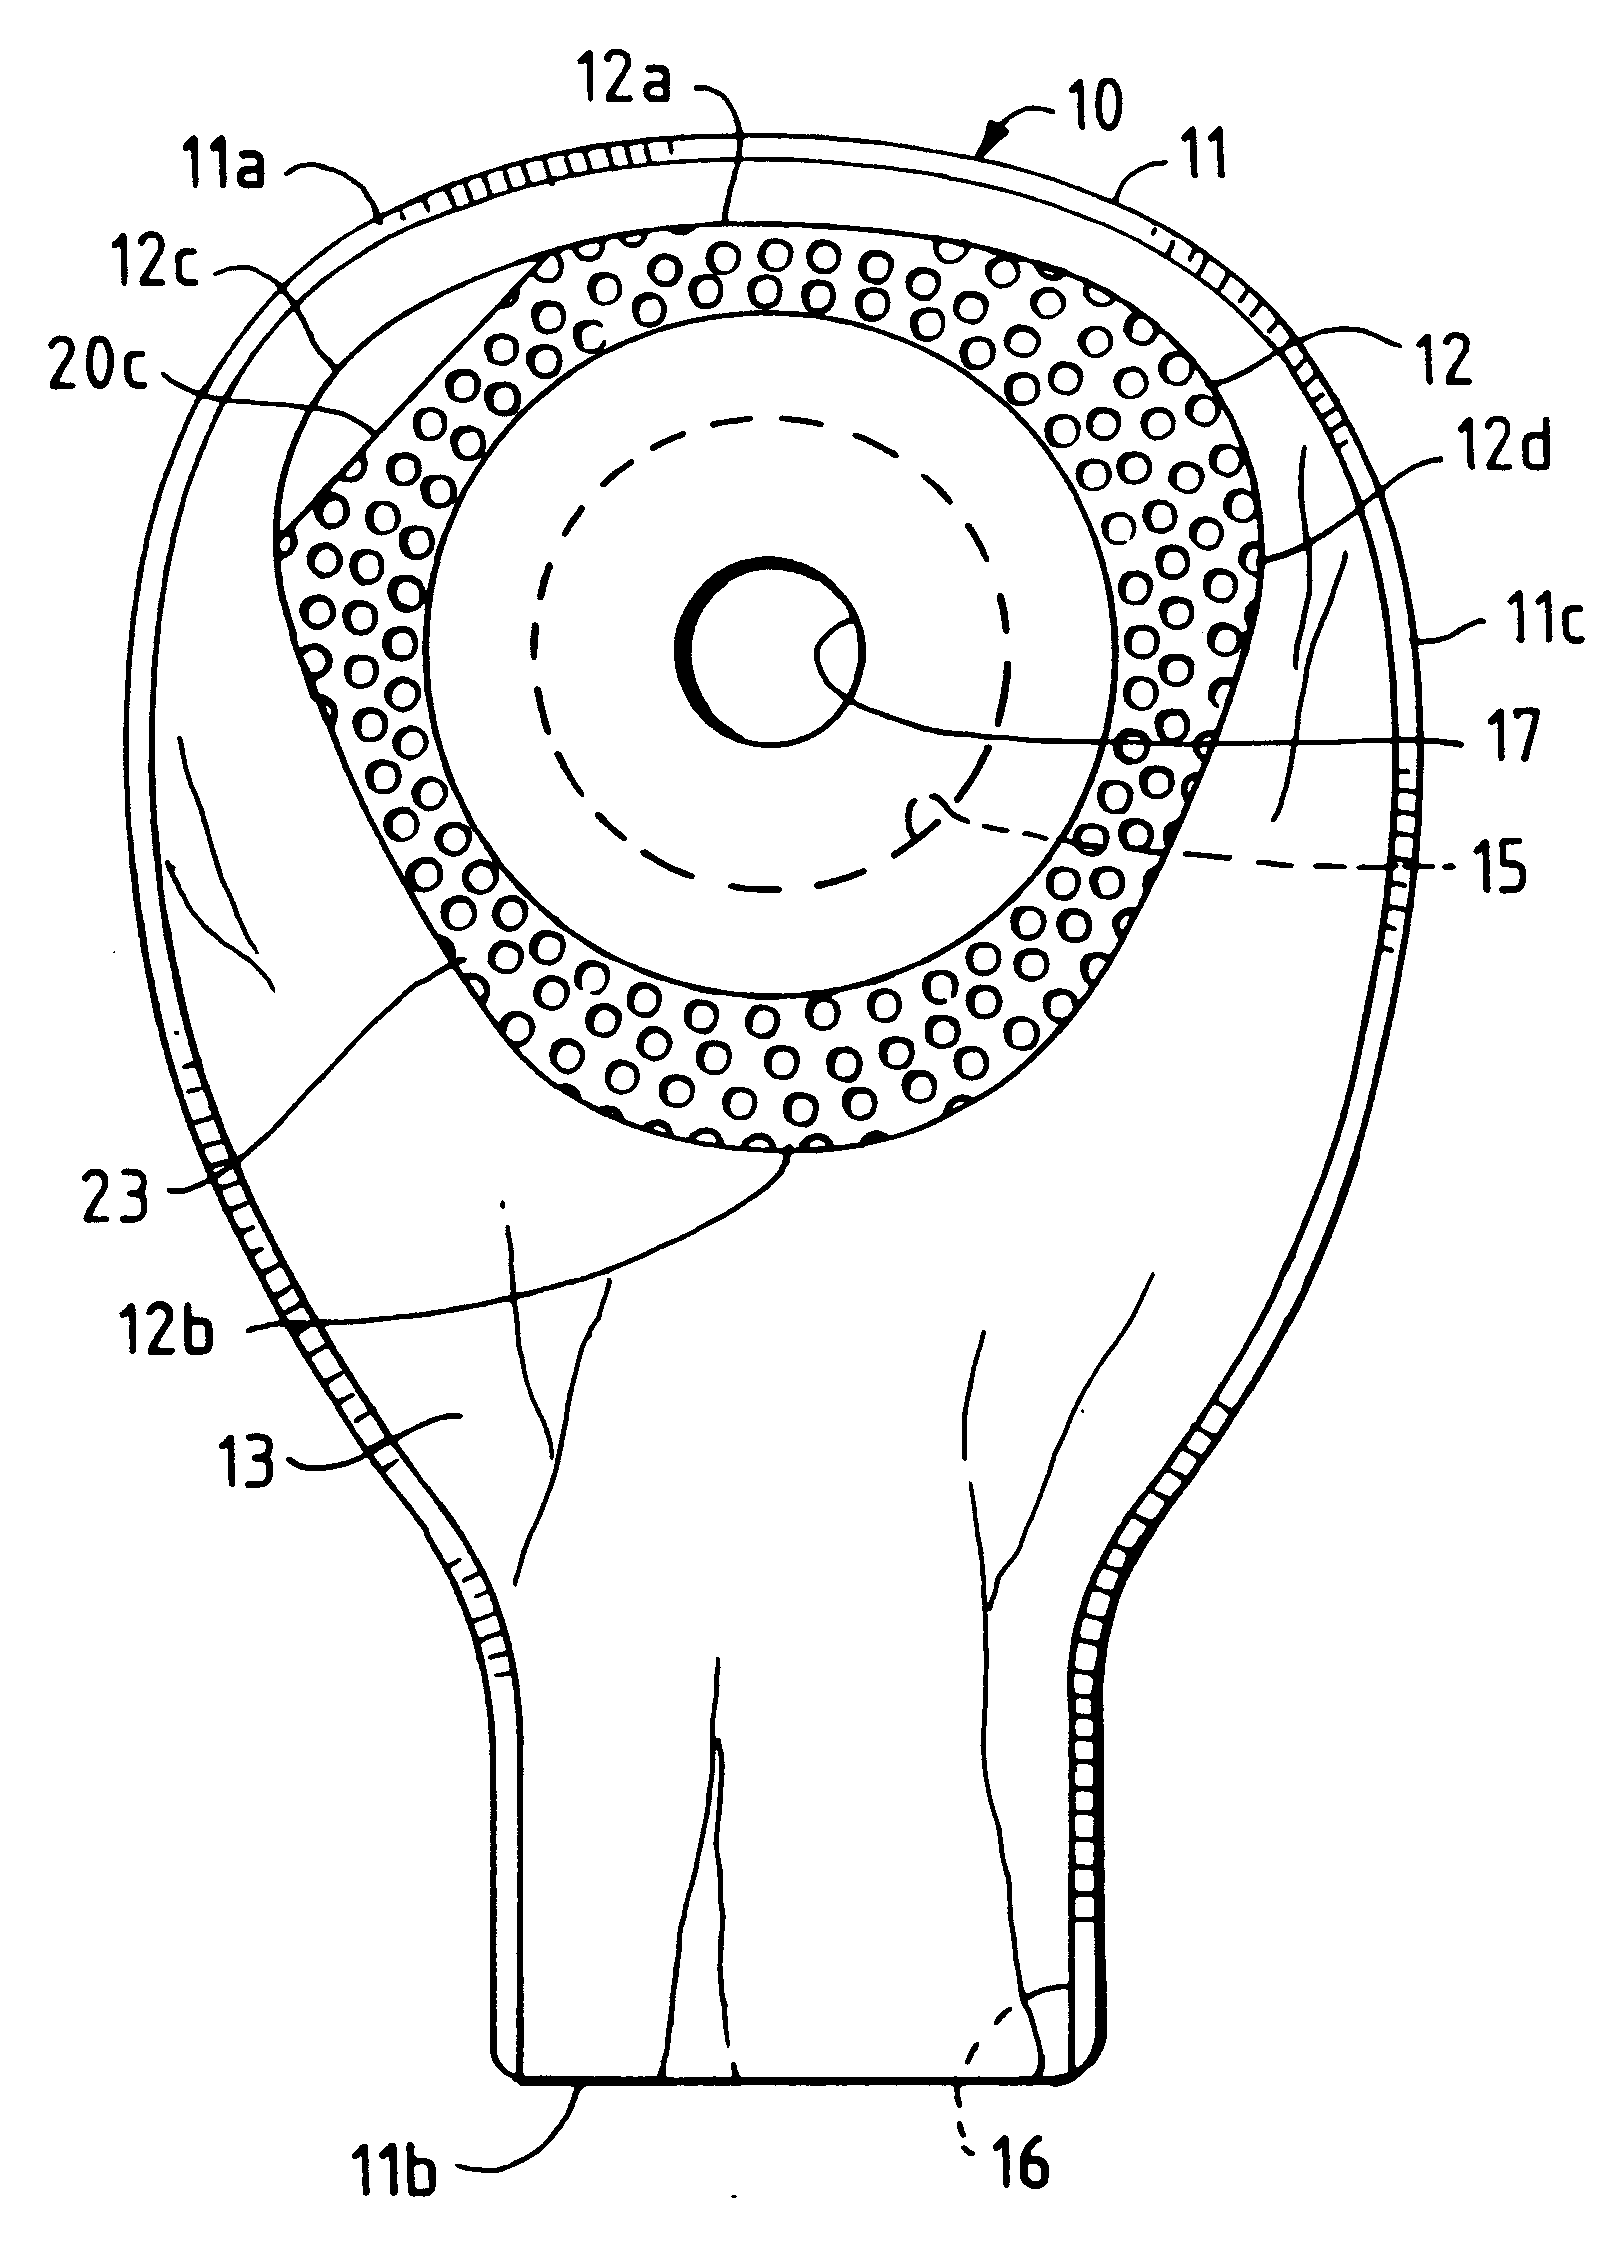 Ostomy appliance with inverted triangular faceplate and non-protruding pull tabs